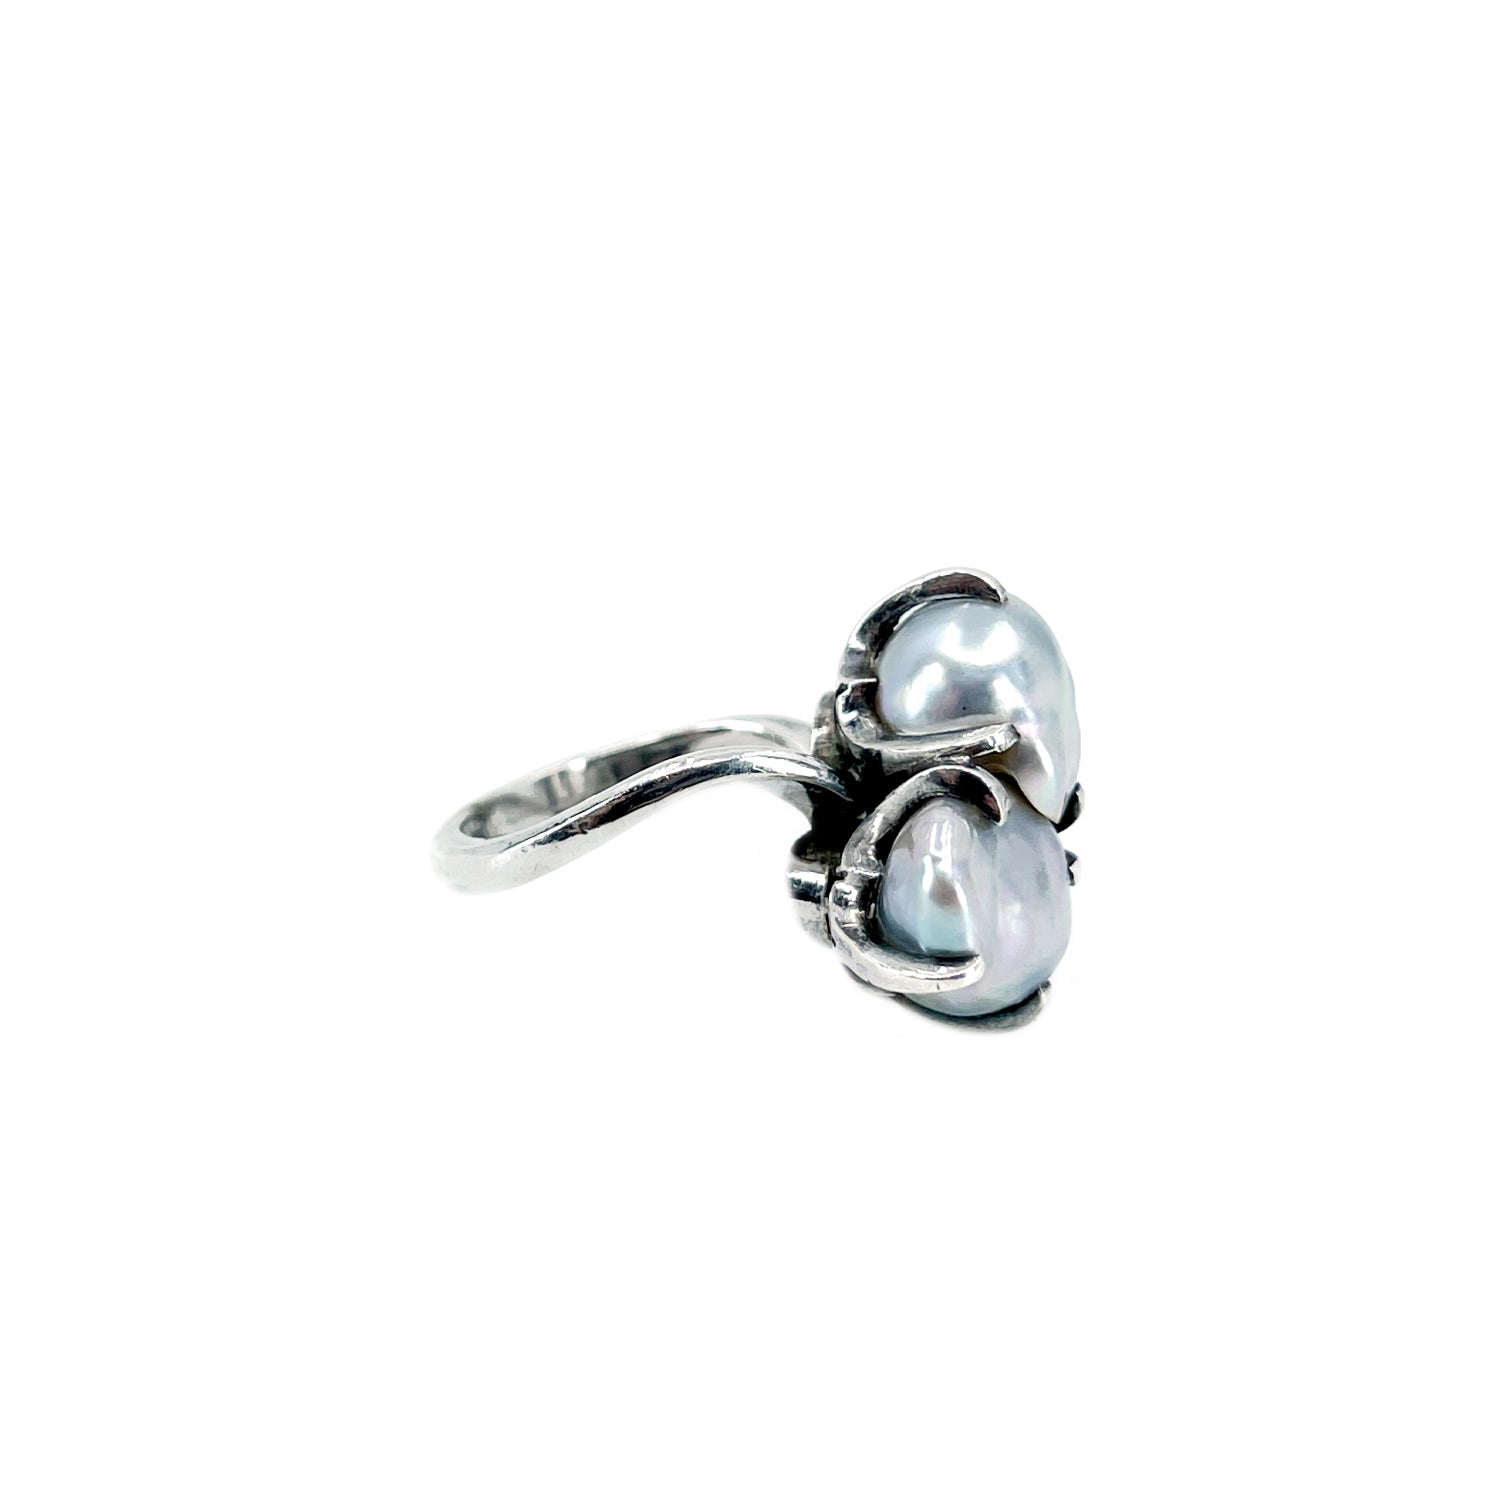 Gothic Bypass Baroque Blue Japanese Saltwater Akoya Cultured Pearl Vintage Ring- Sterling Silver Sz 5